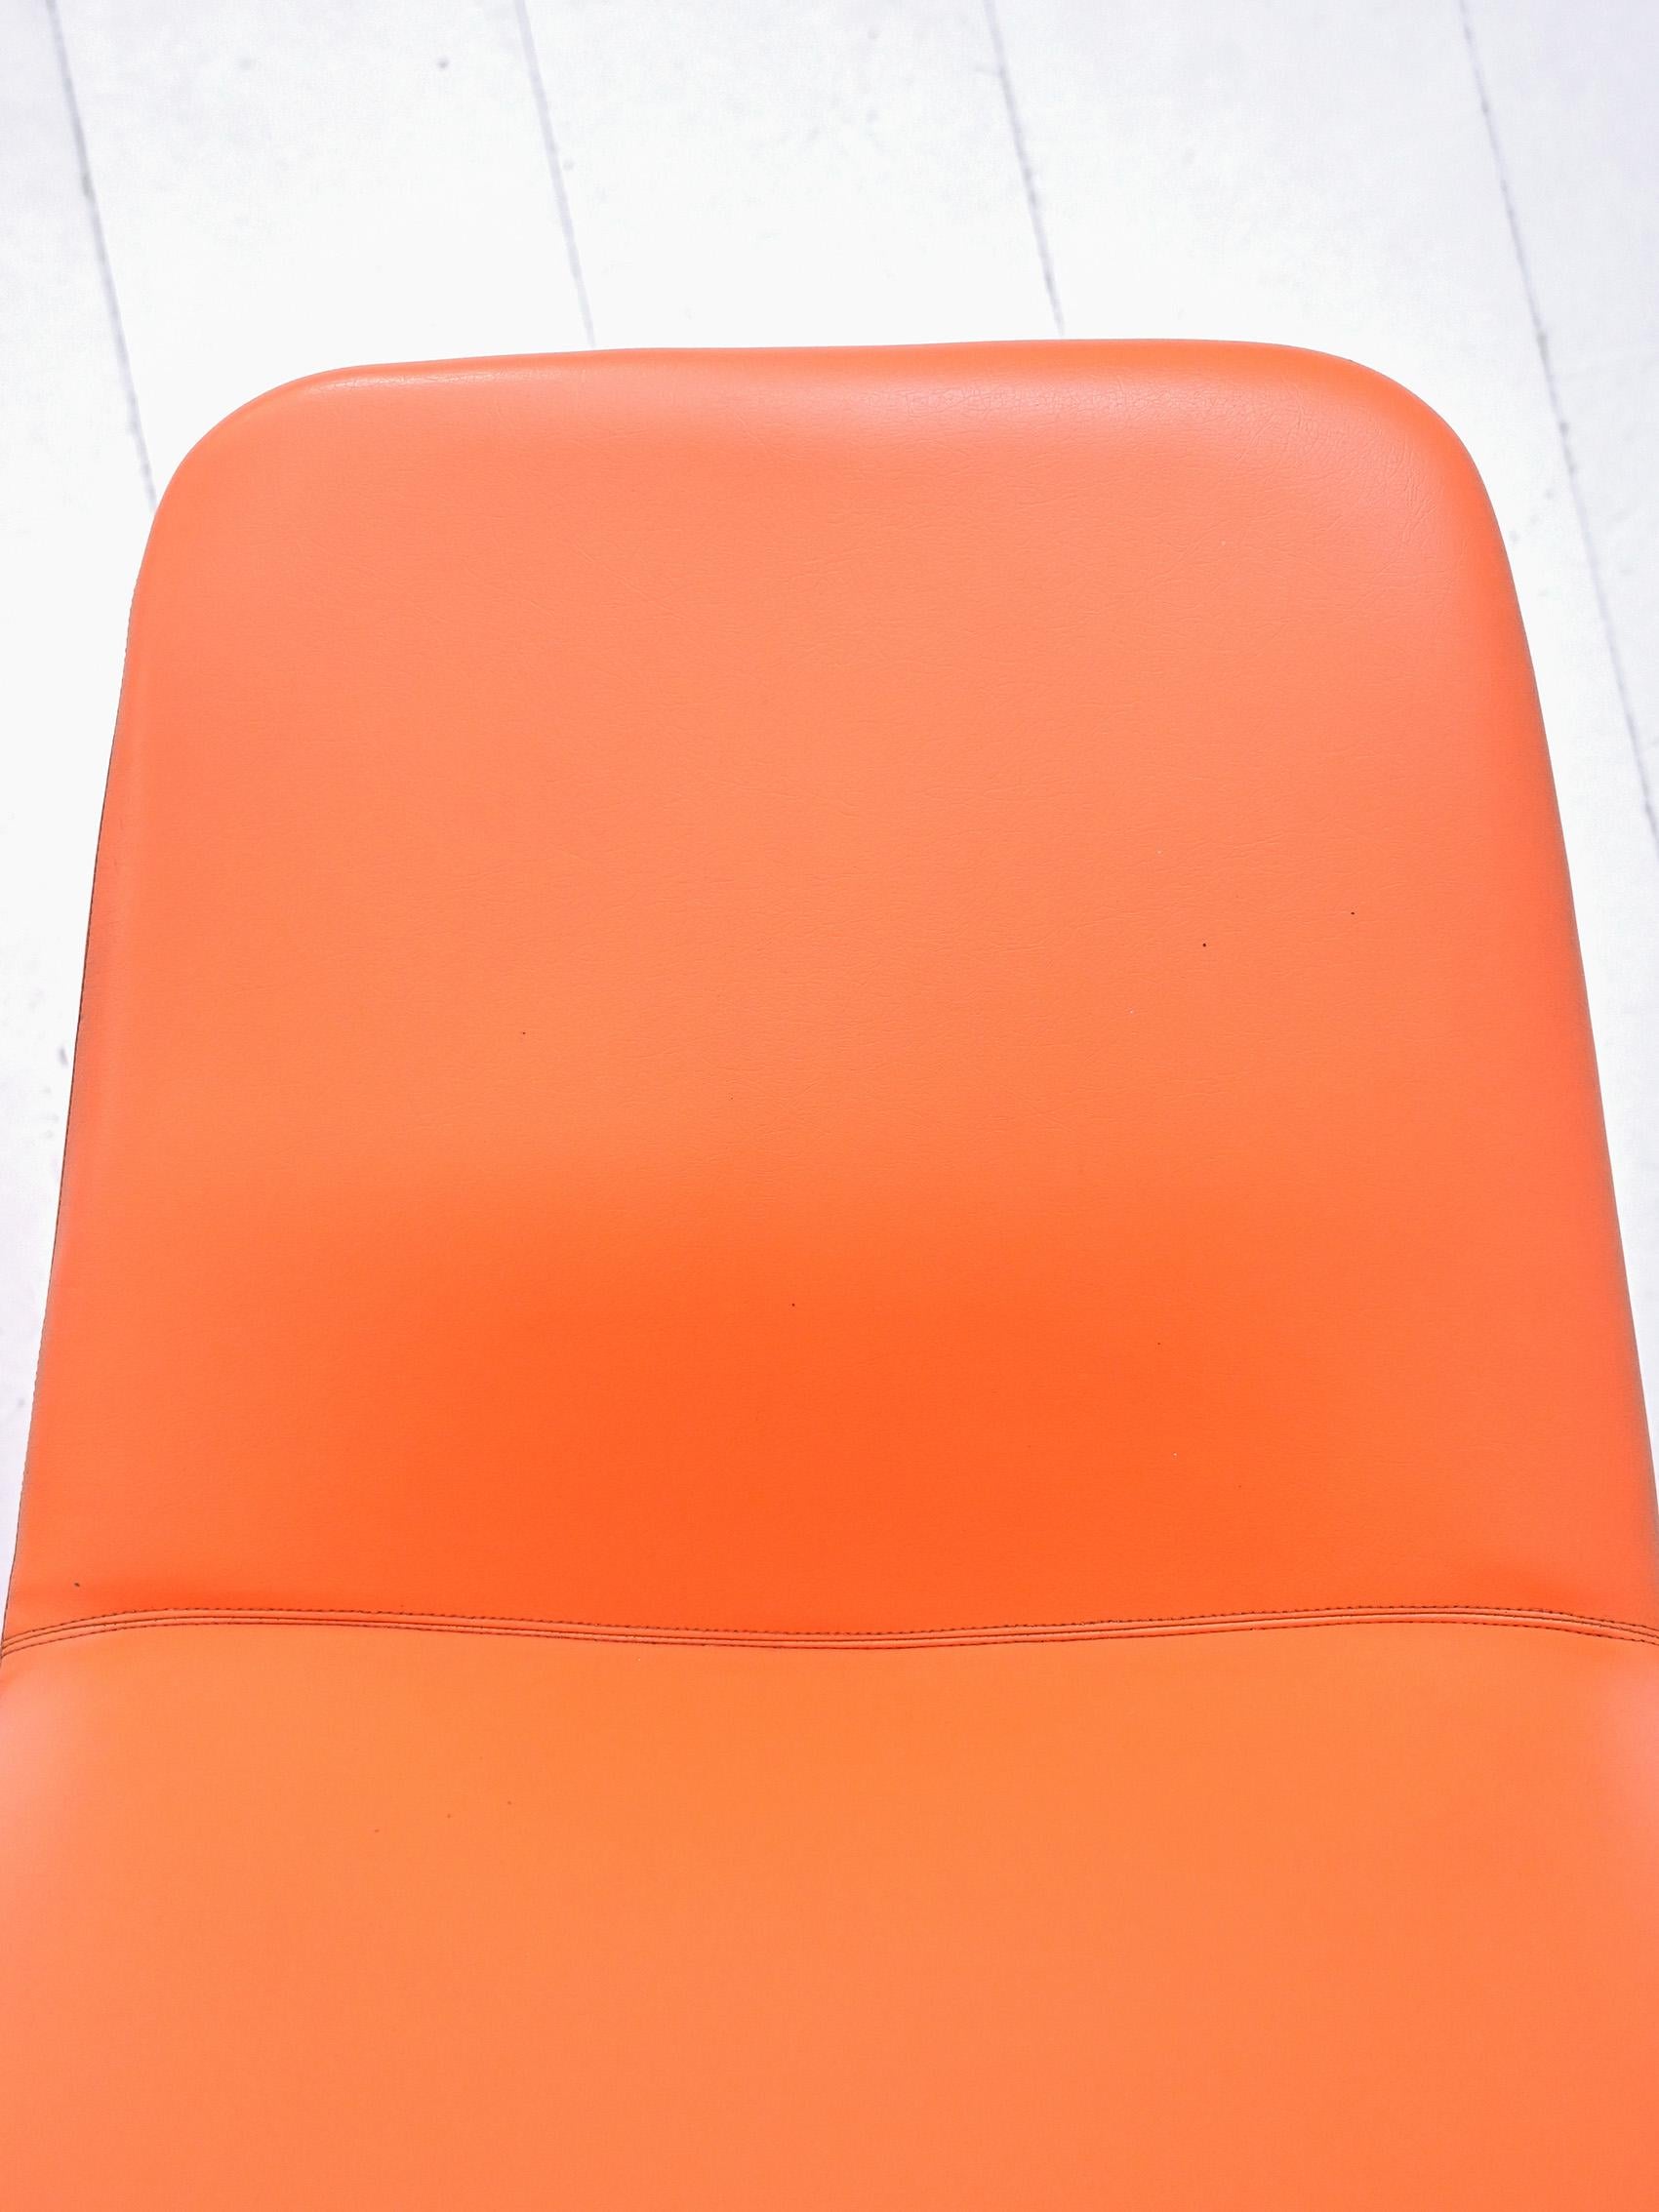 'Spaceage' style swivel chairs orange color, 1970s For Sale 1